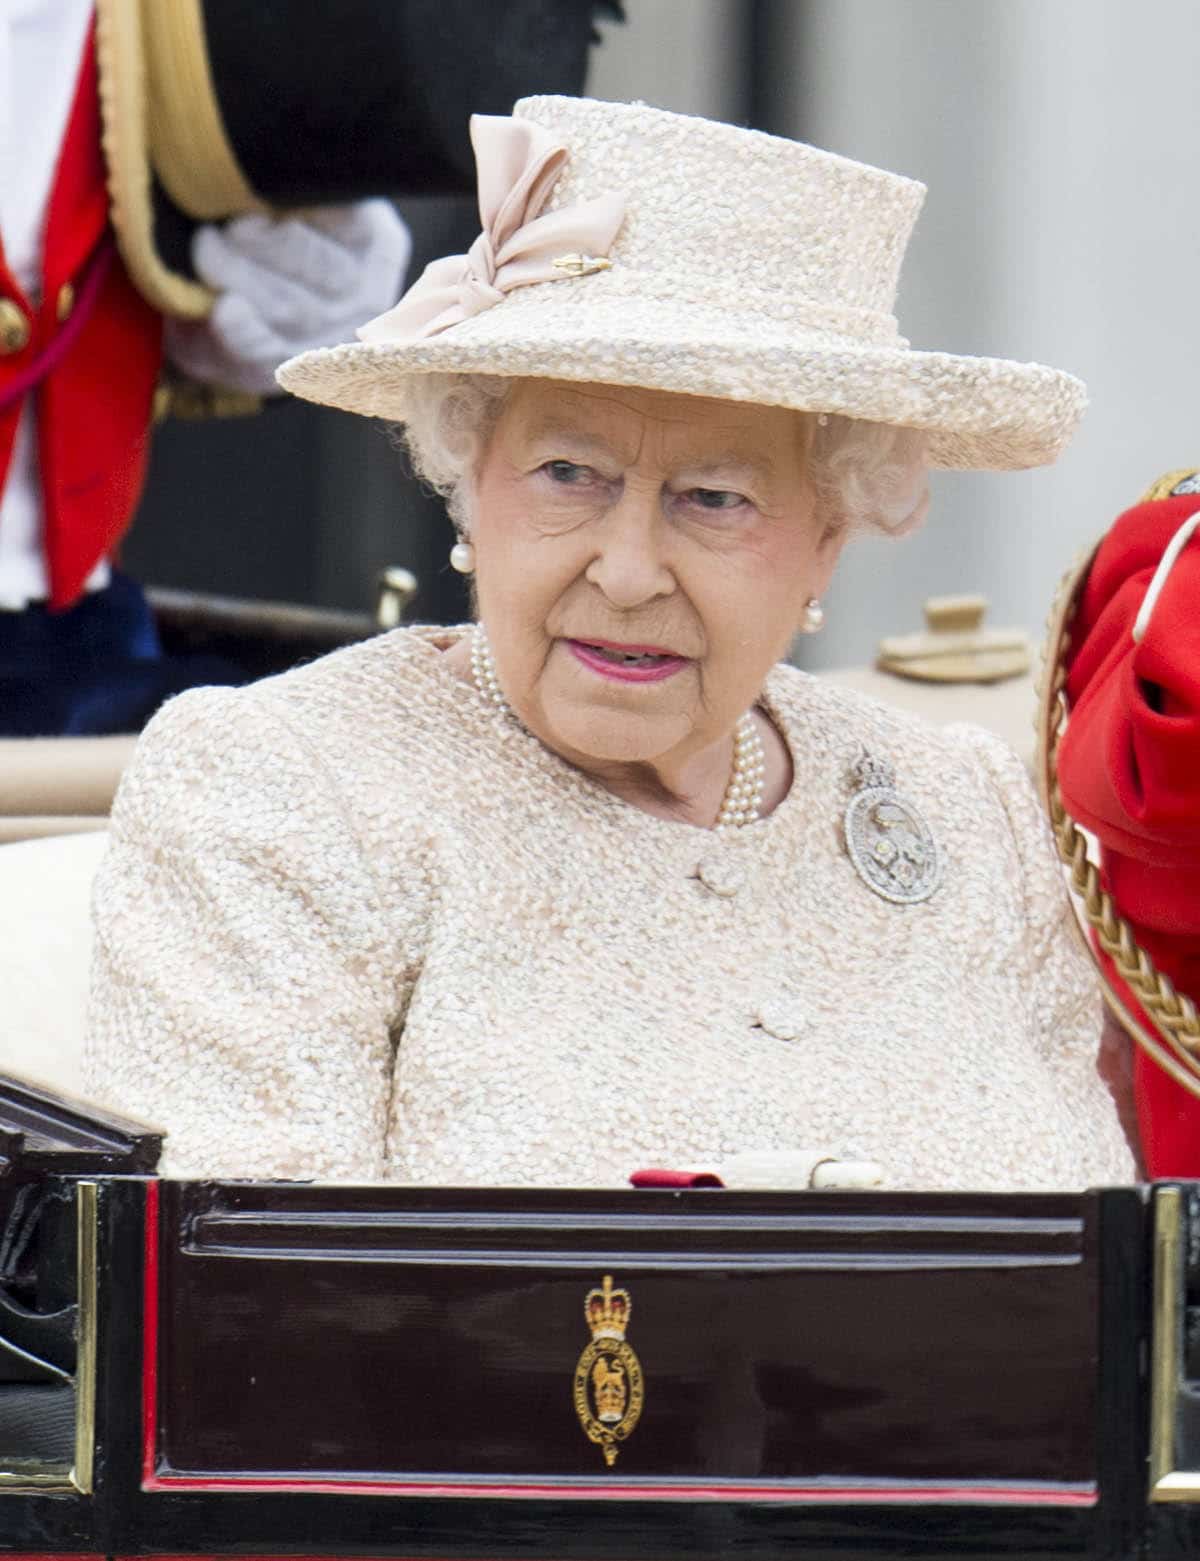 One Of Queen Elizabeth's Relatives To Spend 10 Months In Prison For Sexual Assault